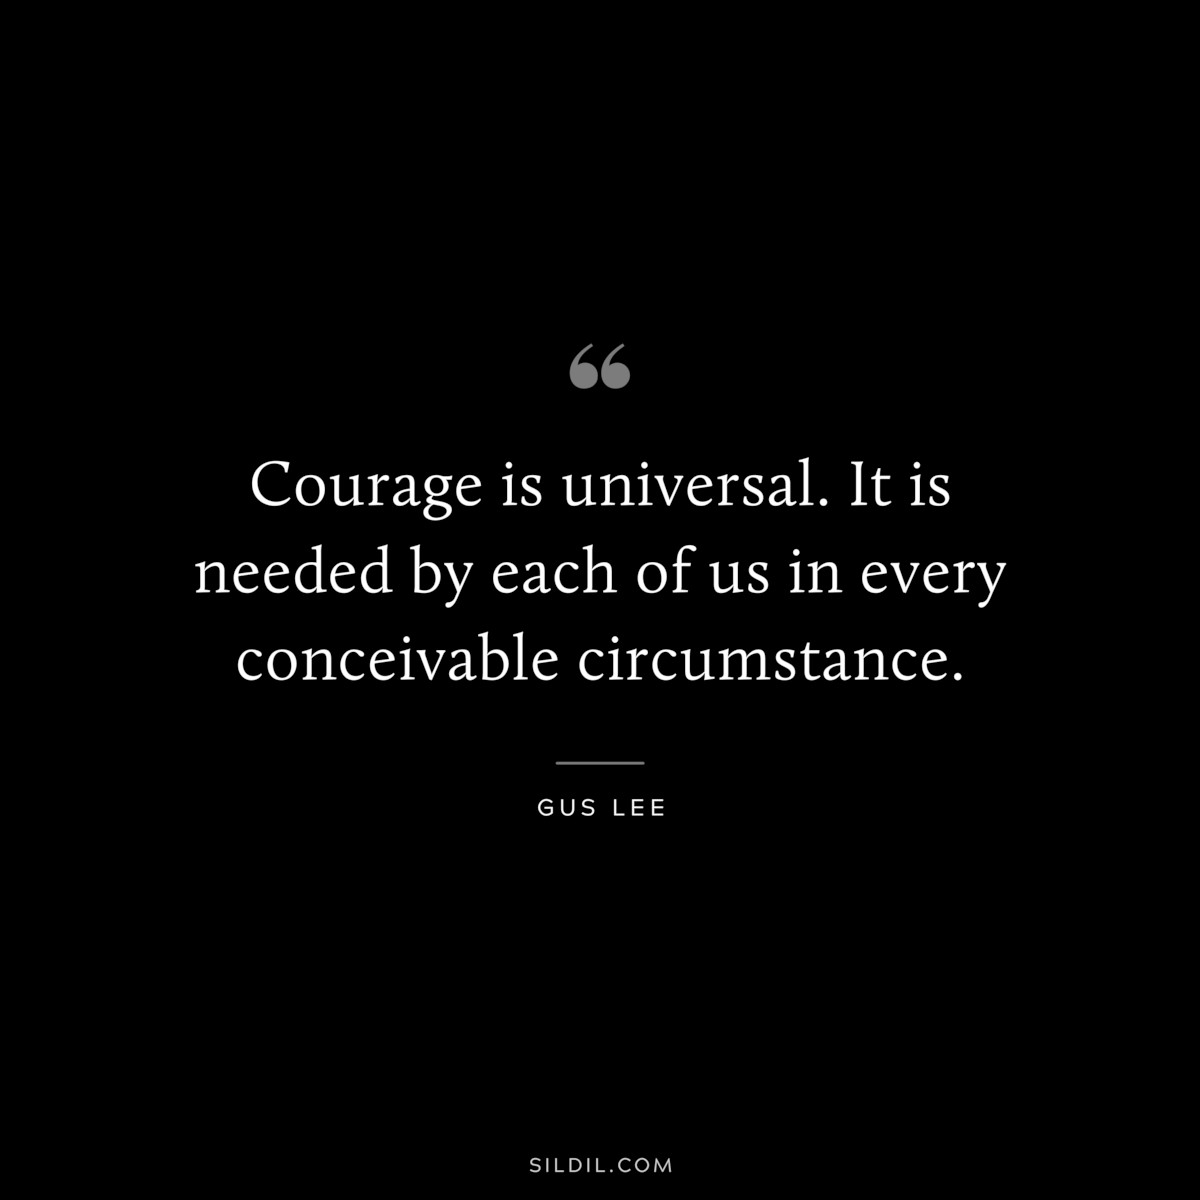 Courage is universal. It is needed by each of us in every conceivable circumstance. ― Gus Lee